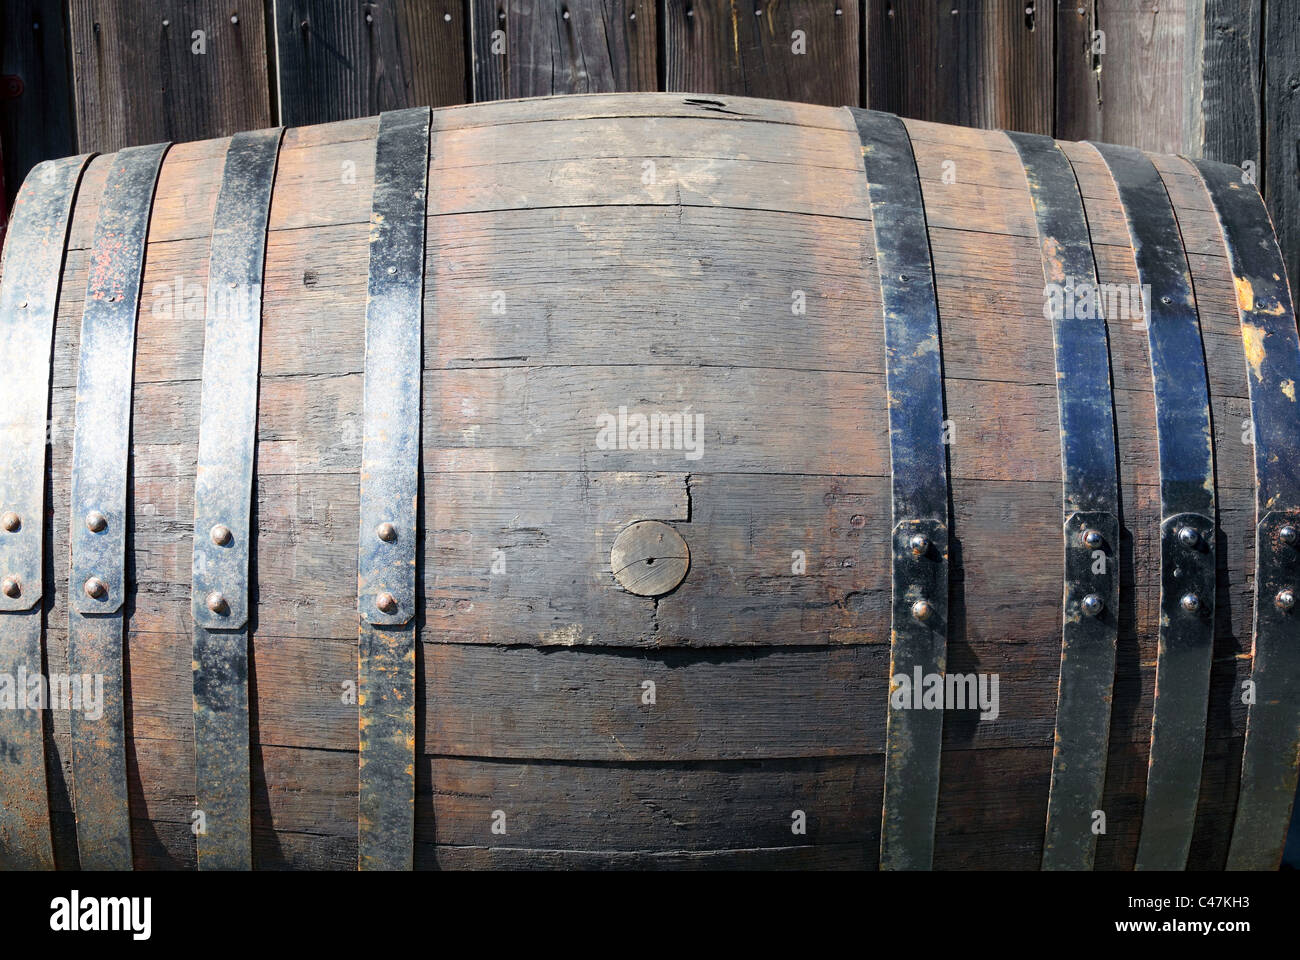 Old wooden barrel cask for alcohol Stock Photo